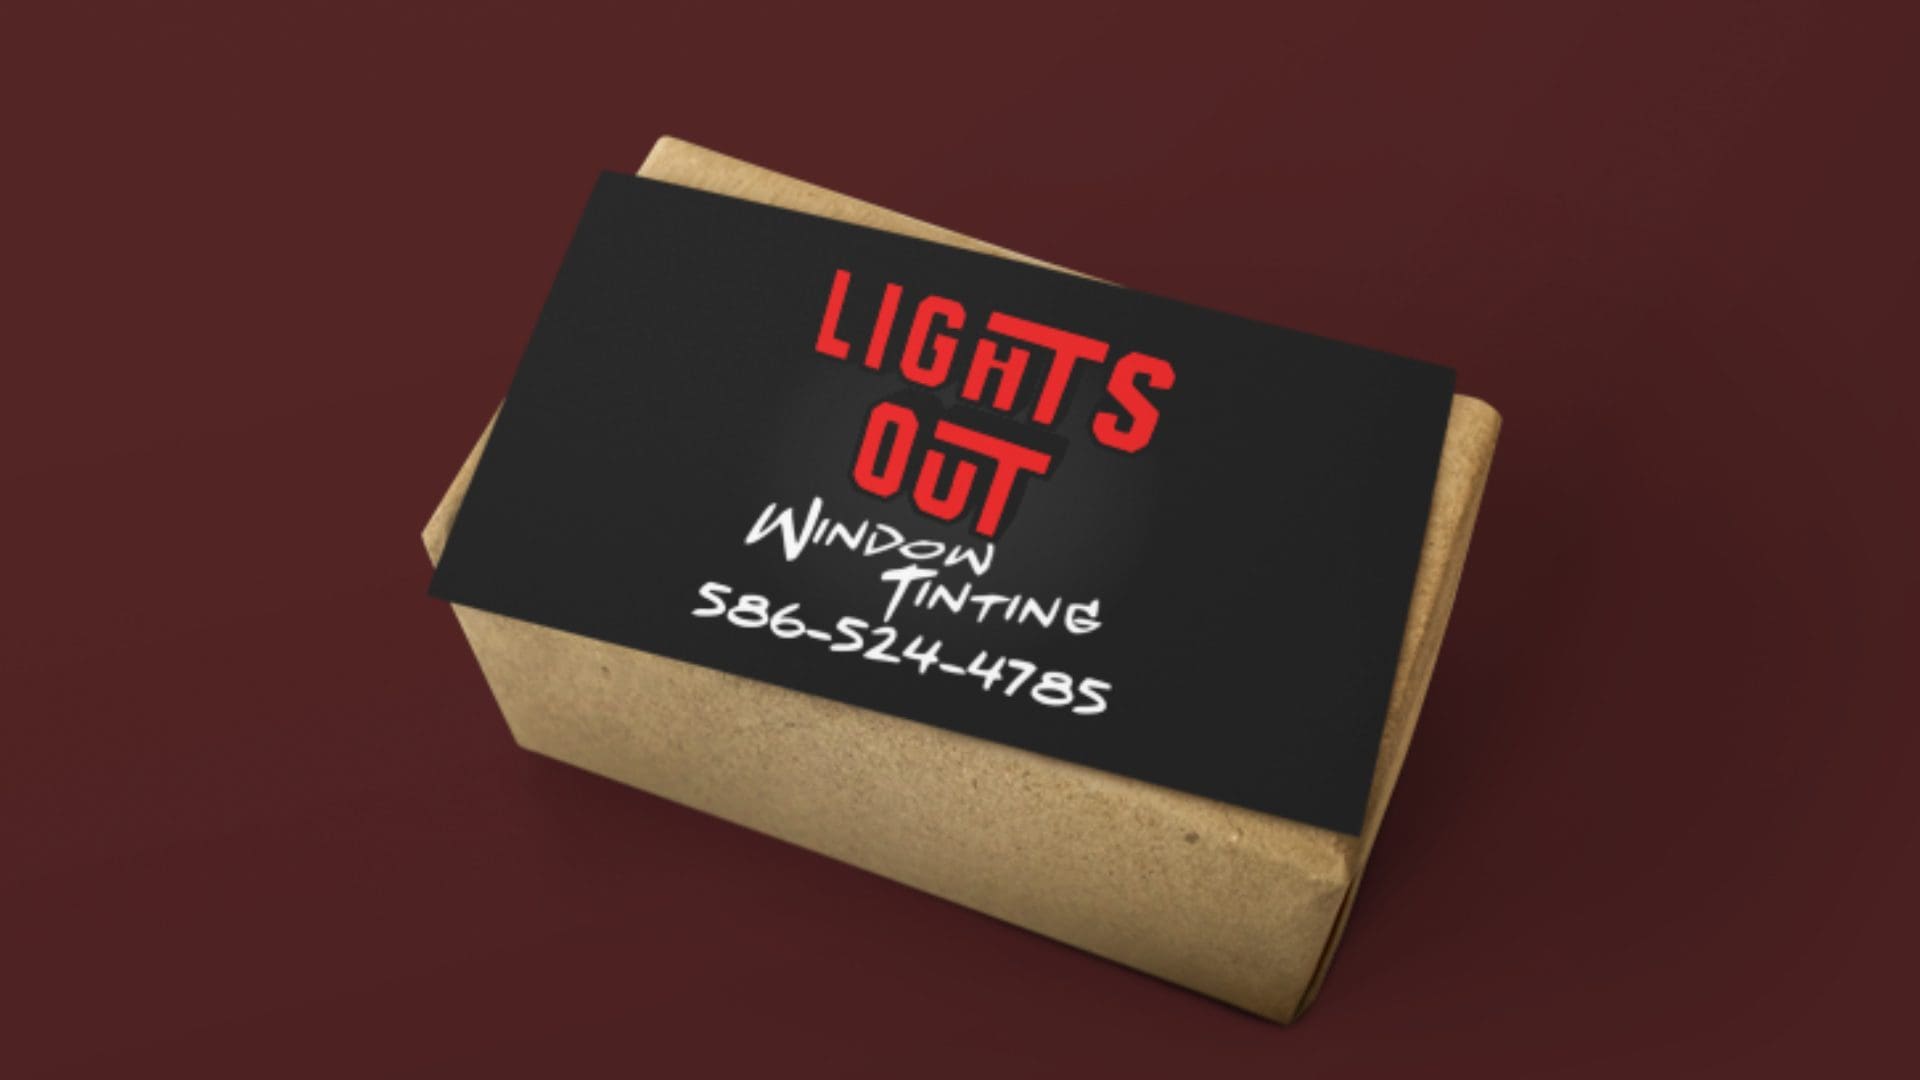 Lights Out Window Tinting - Business Card Mockup (4)